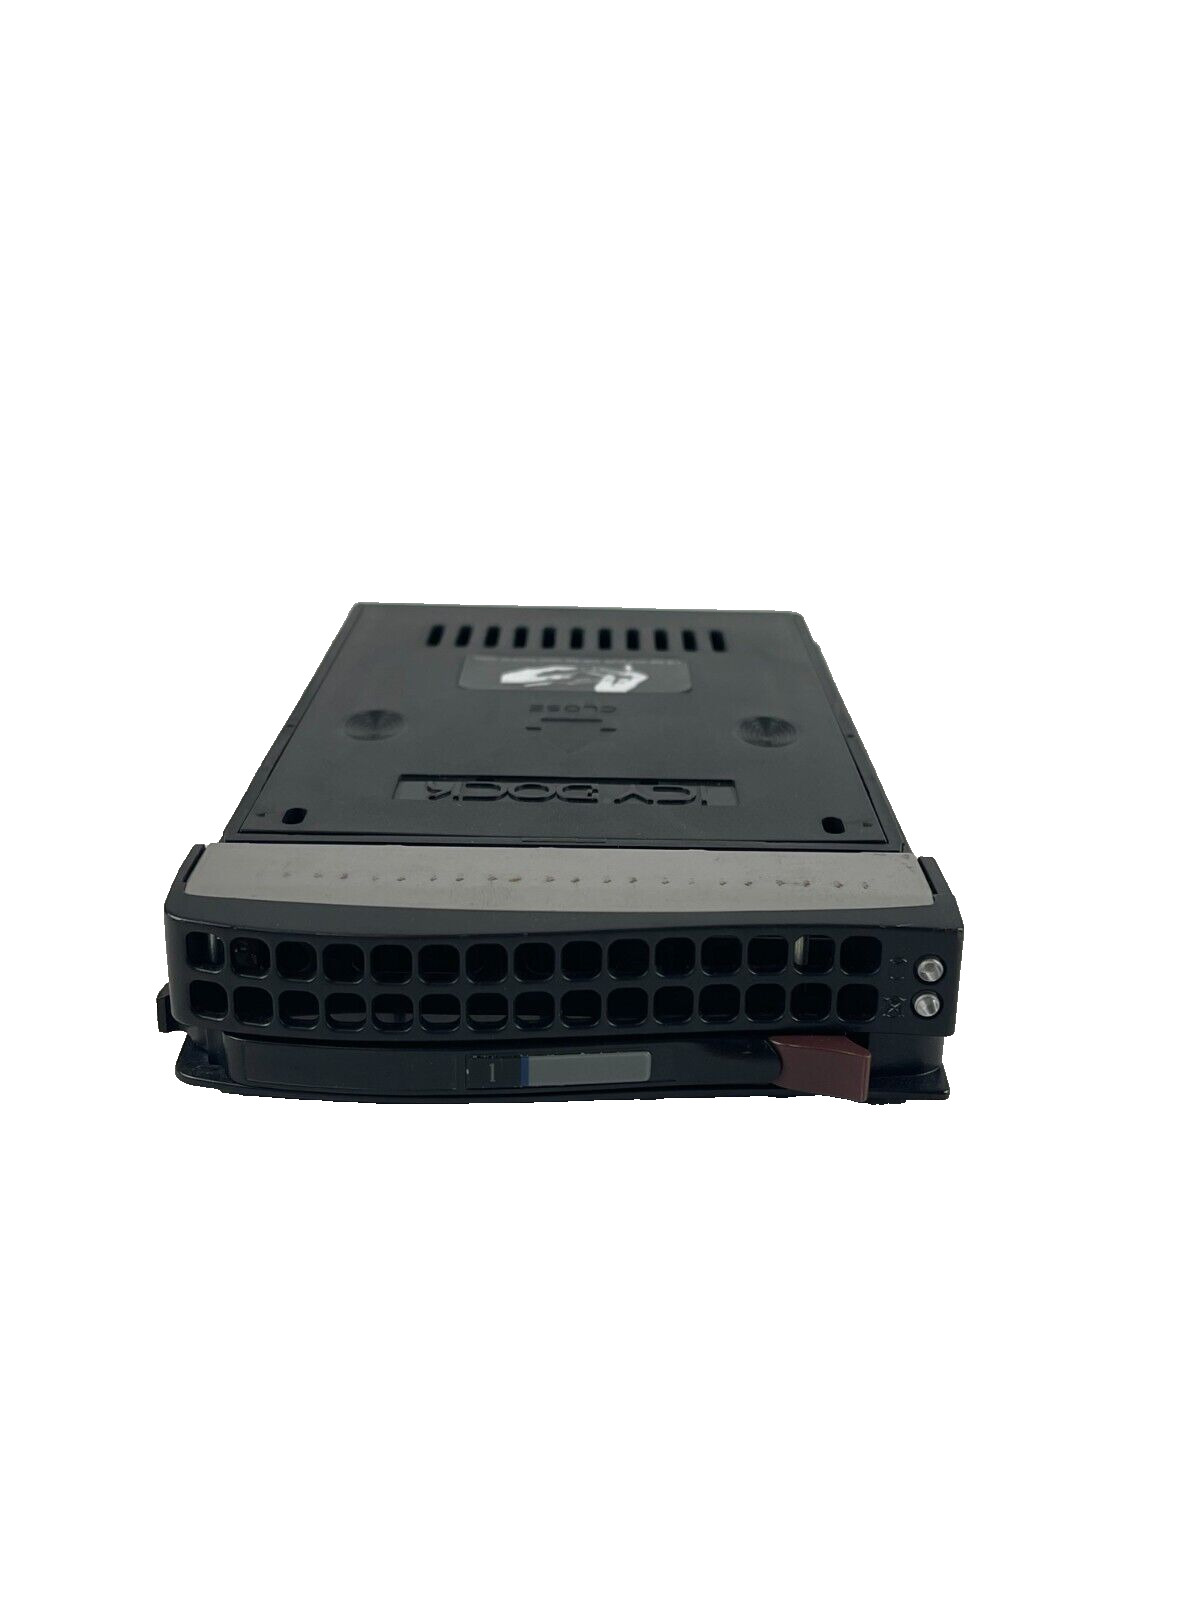 SUPERMICRO/ICY DOCK MB882SP-1S-2B 2.5 inch to 3.5\